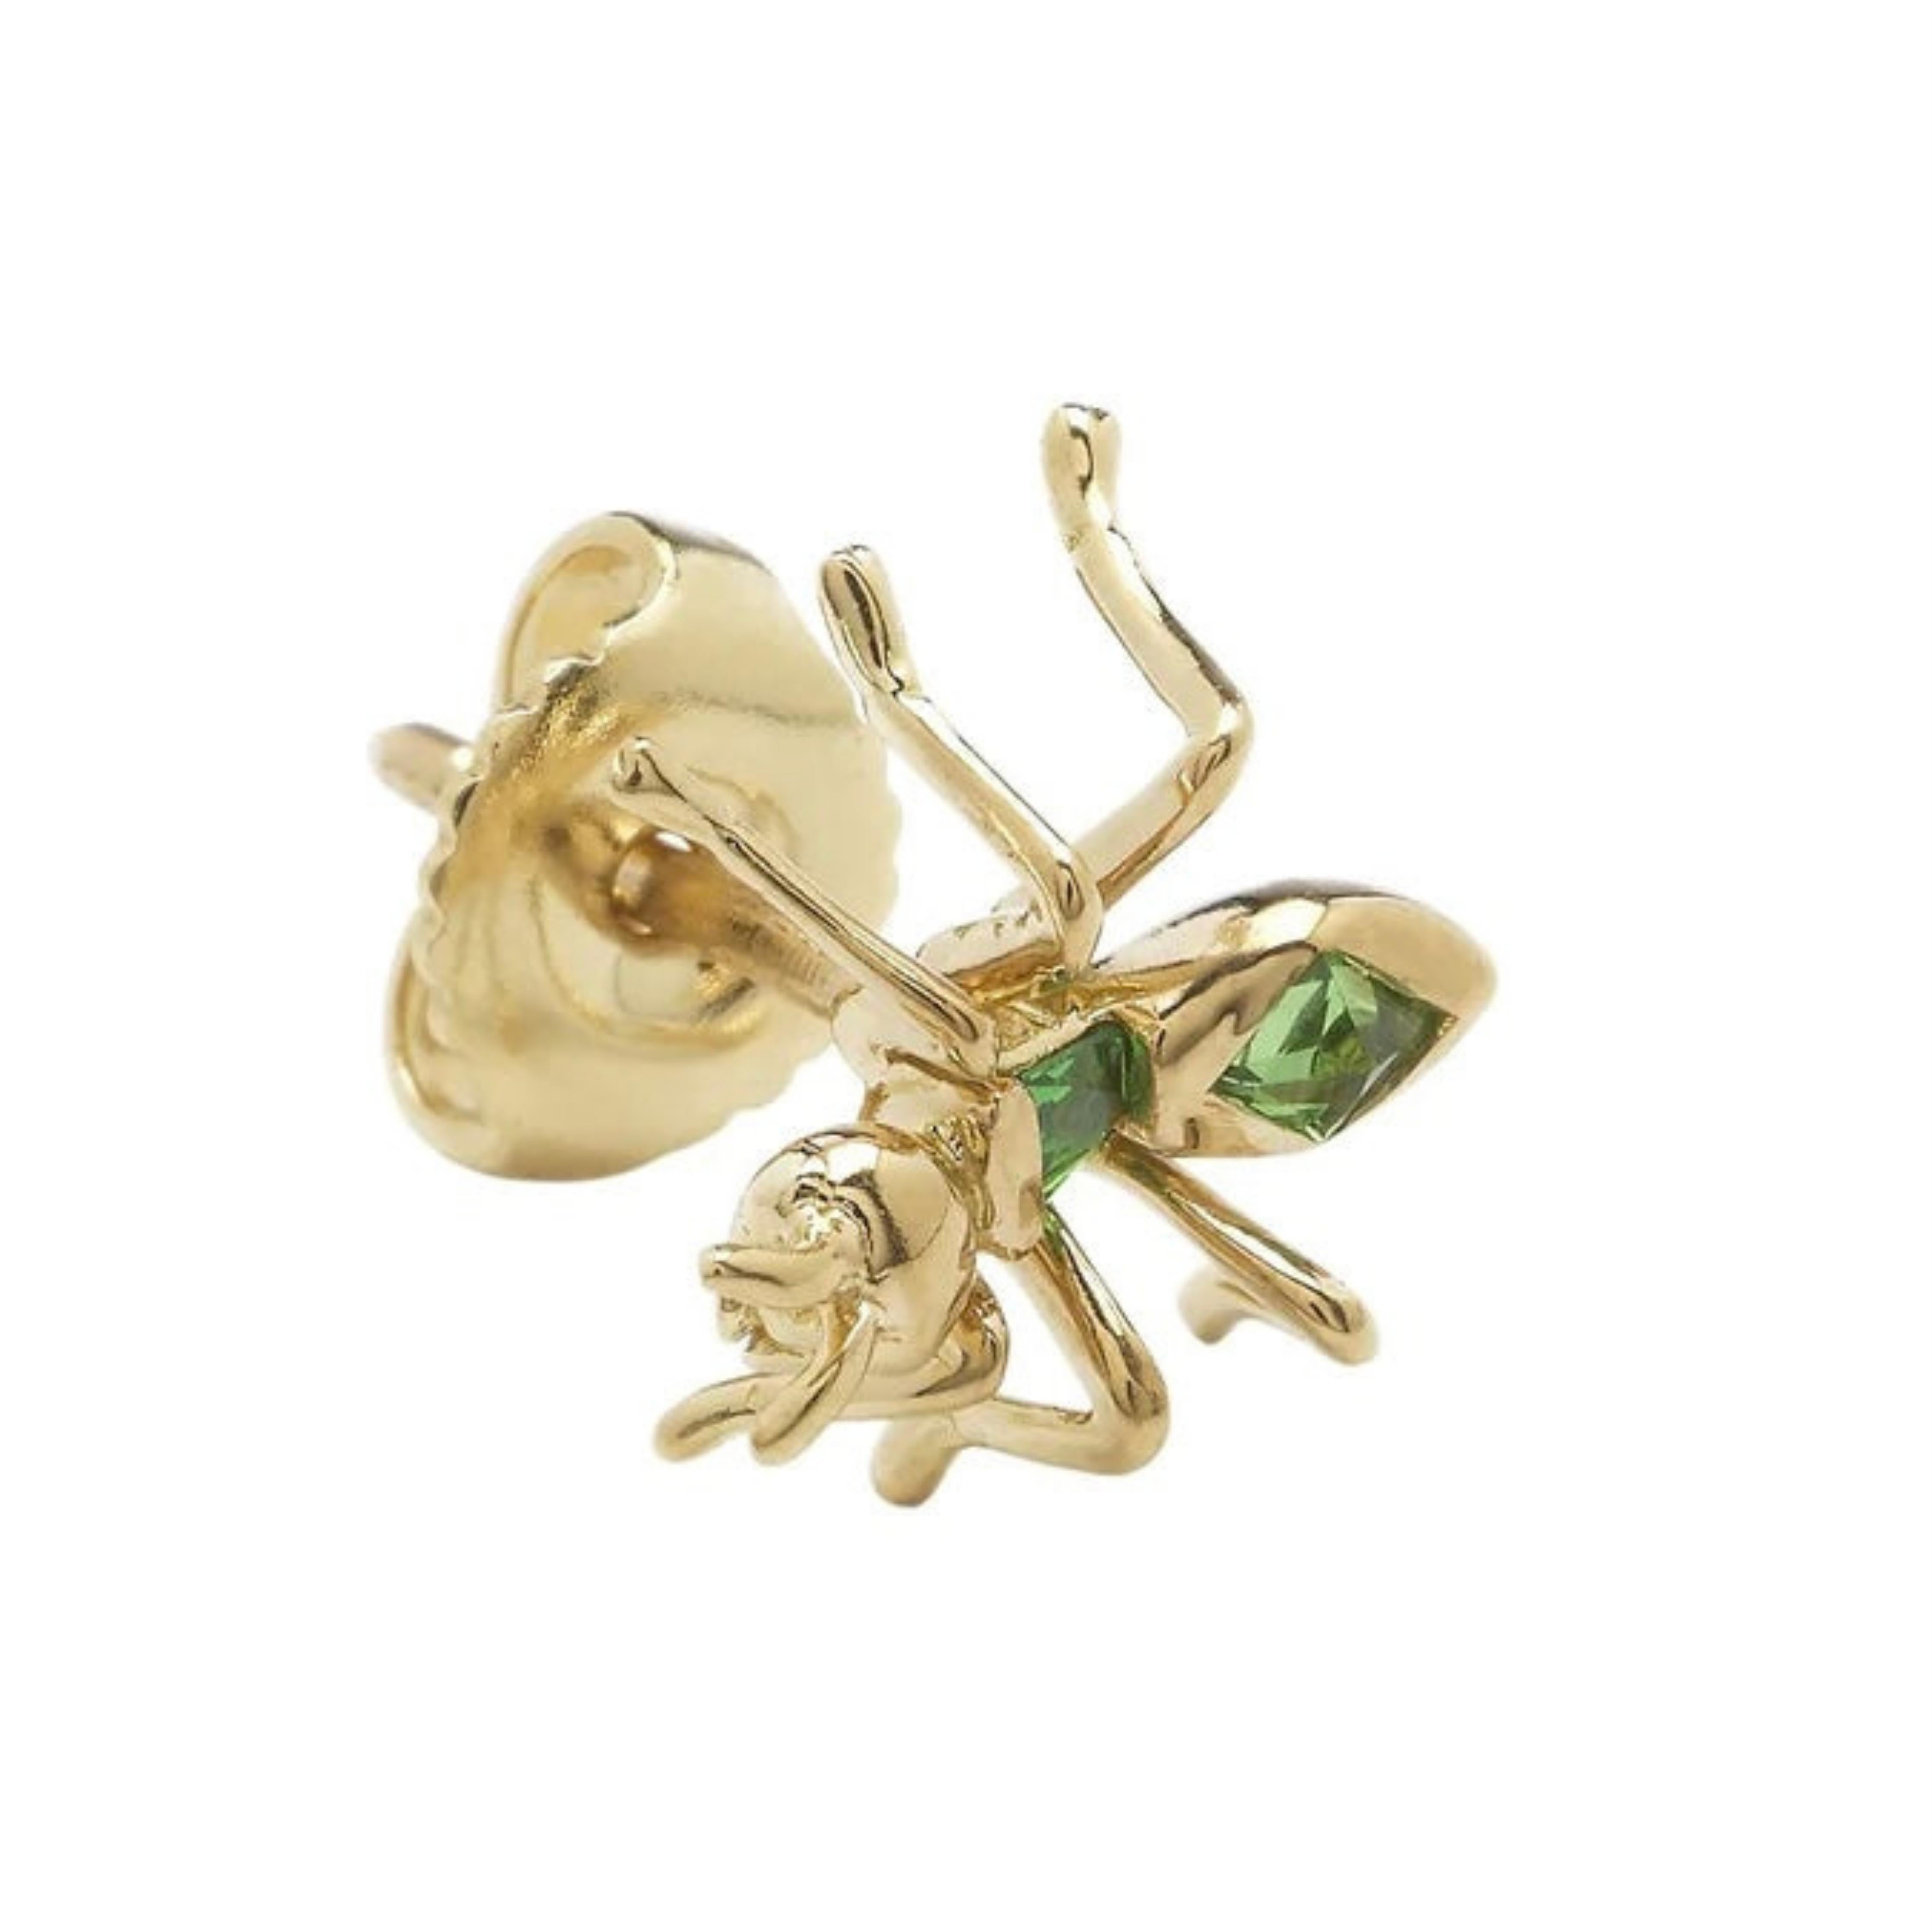 Bibi van der Velden Ant Single Stud Earring - Green Tsavorite. Sculptural single earring in the shape of an ant with two Green Tsavorite stone forming the body. Earring shown from the side view.